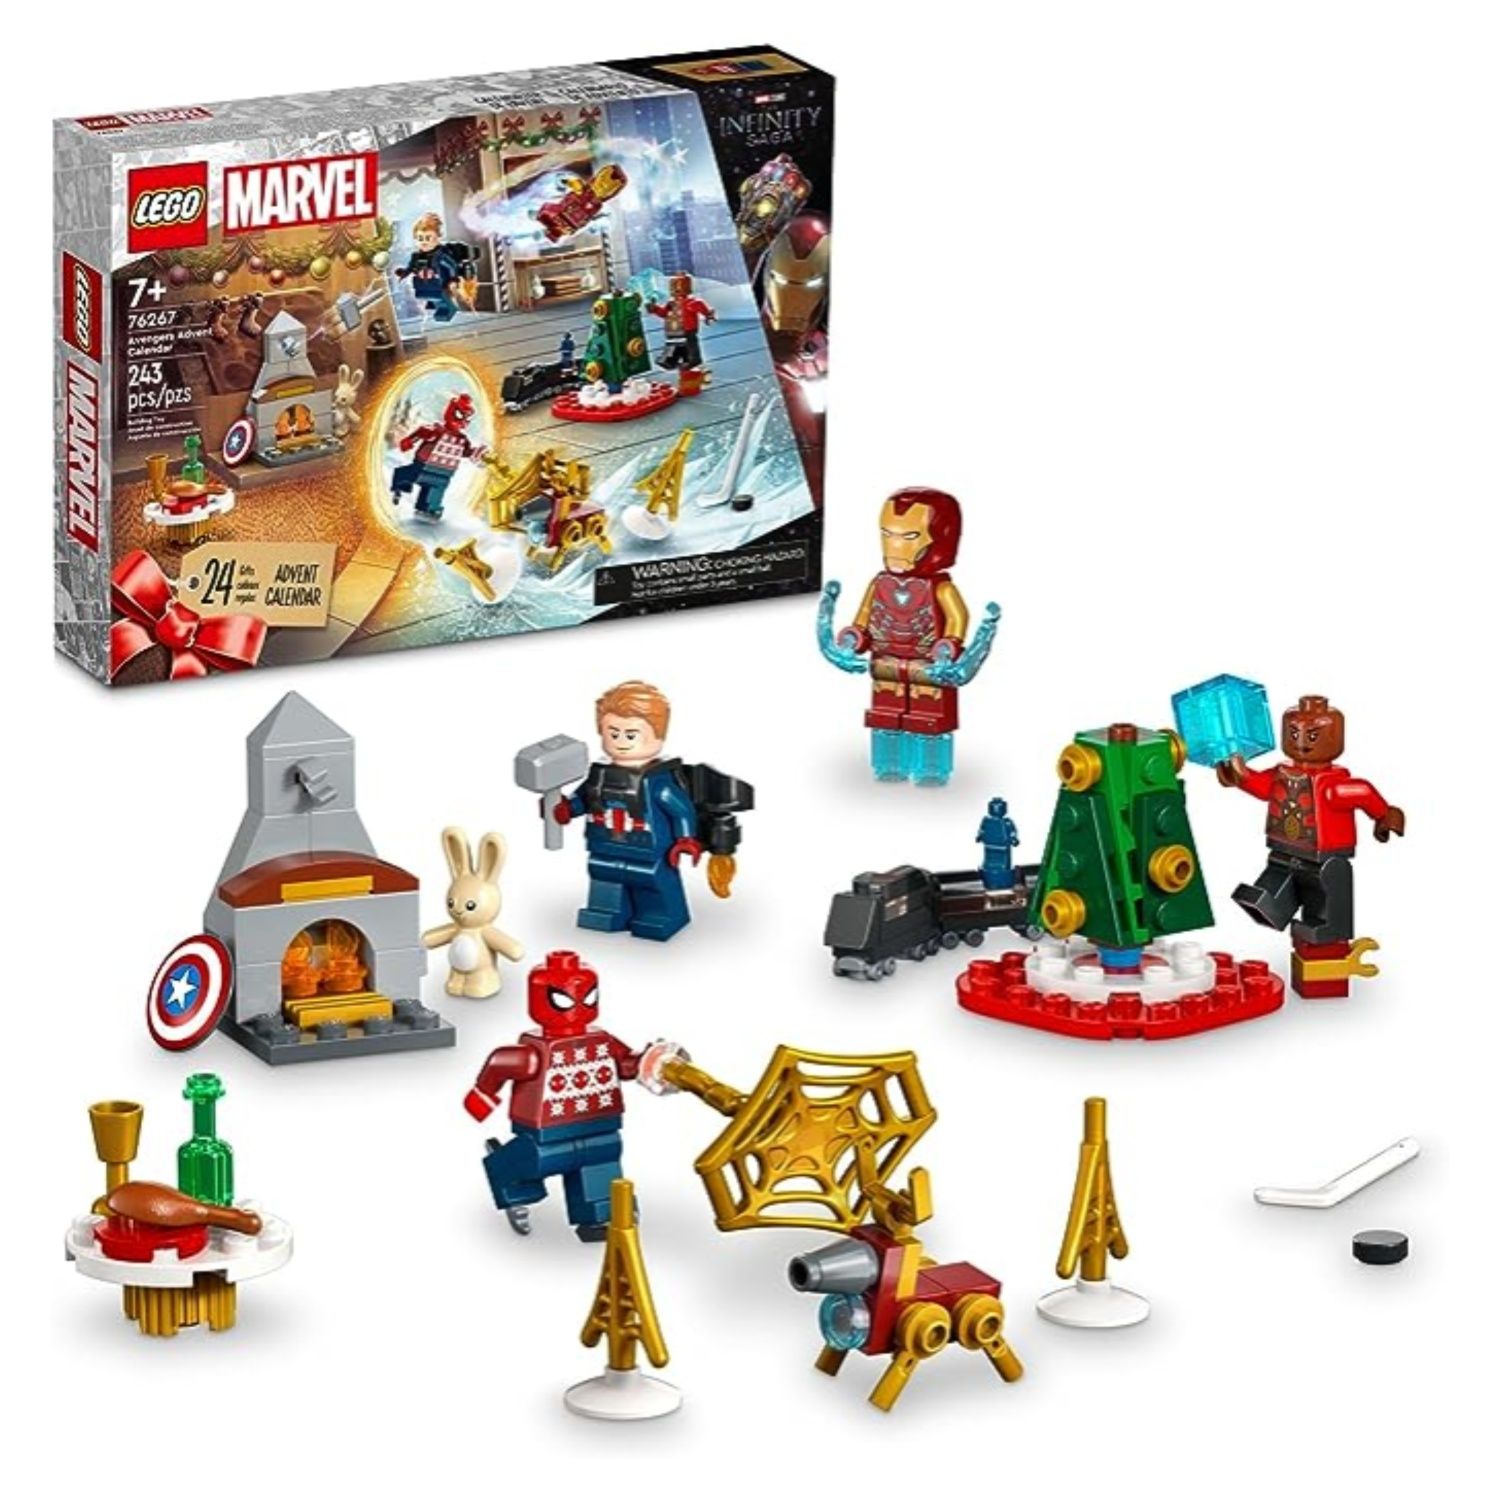 This image shows the packaging and contents of the Marvel Lego advent calendar